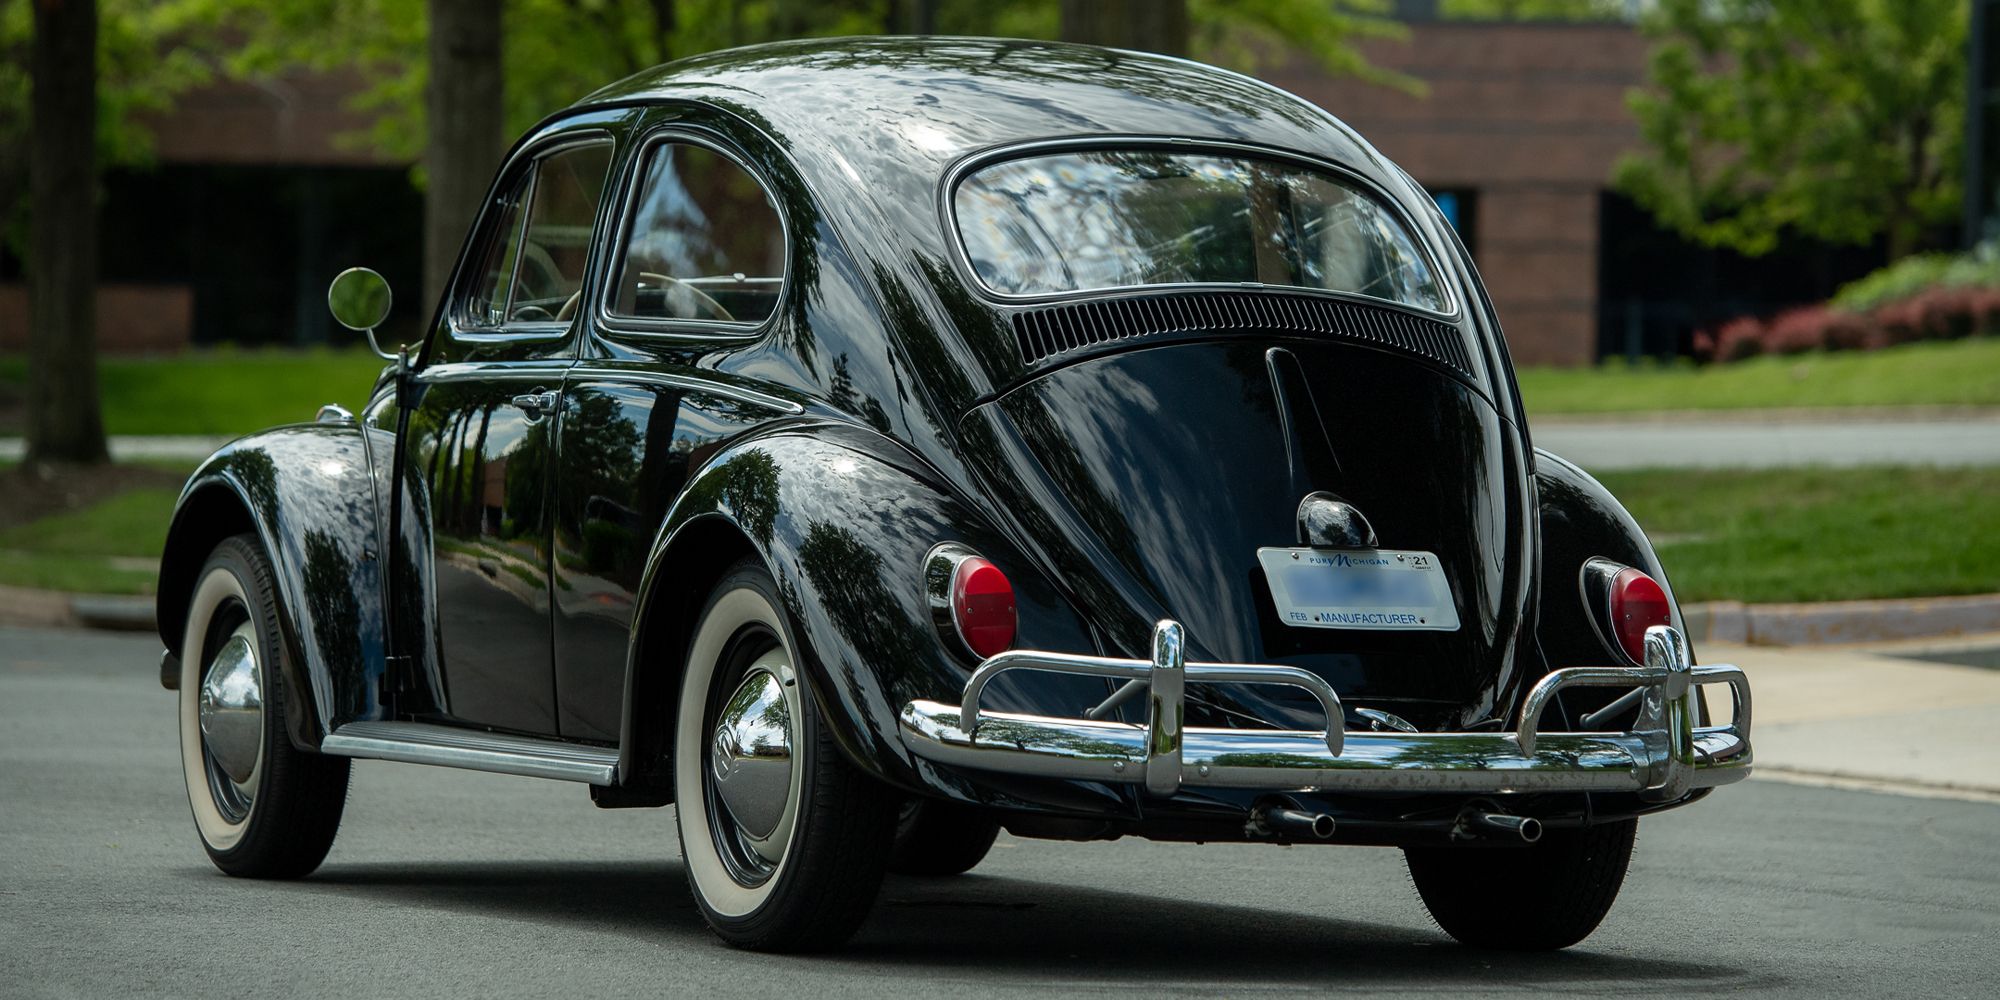 The rear of the Beetle